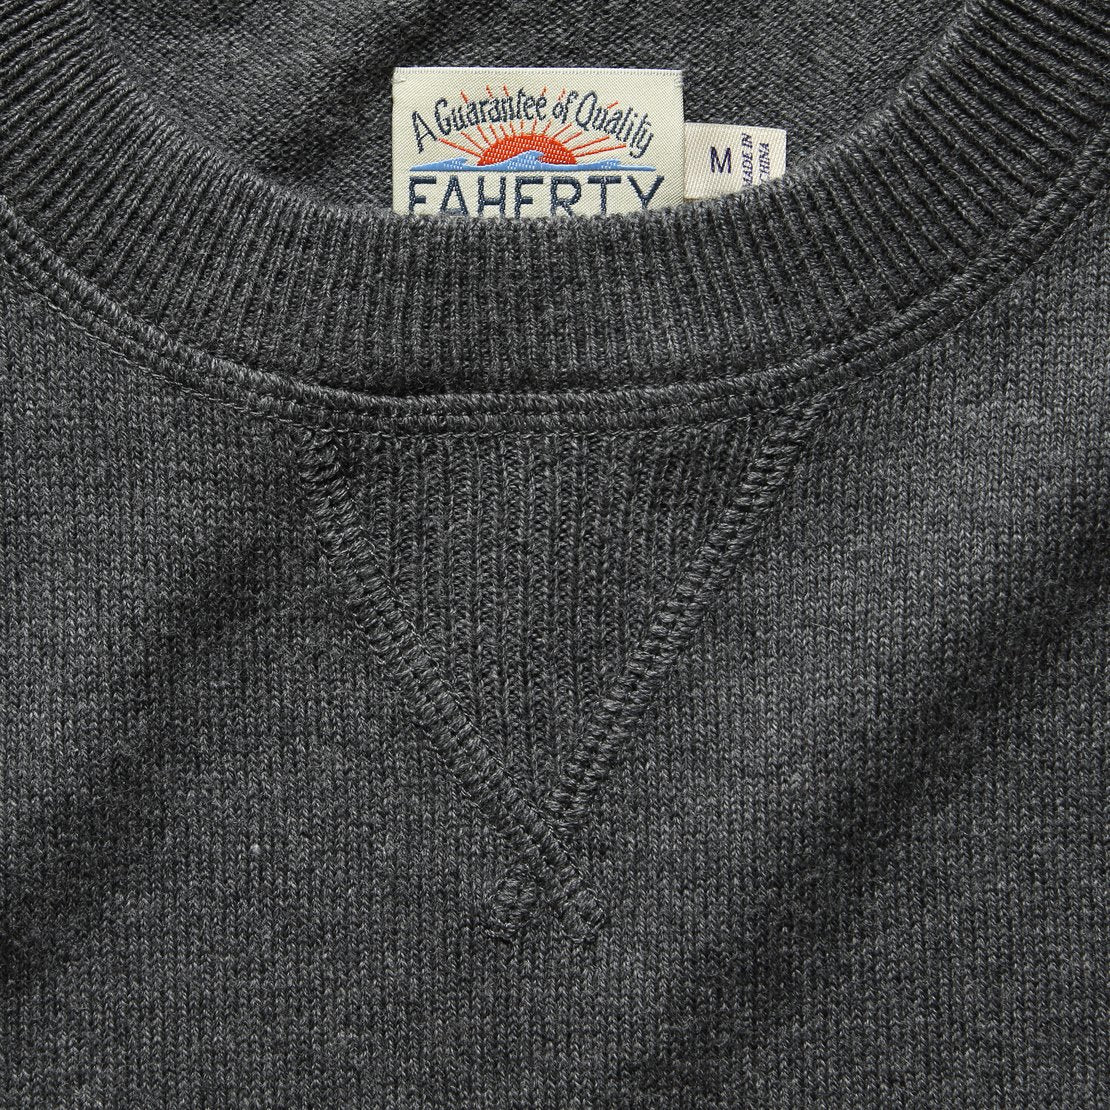 Sconset Crew Sweater - Ash - Faherty - STAG Provisions - Tops - Sweater